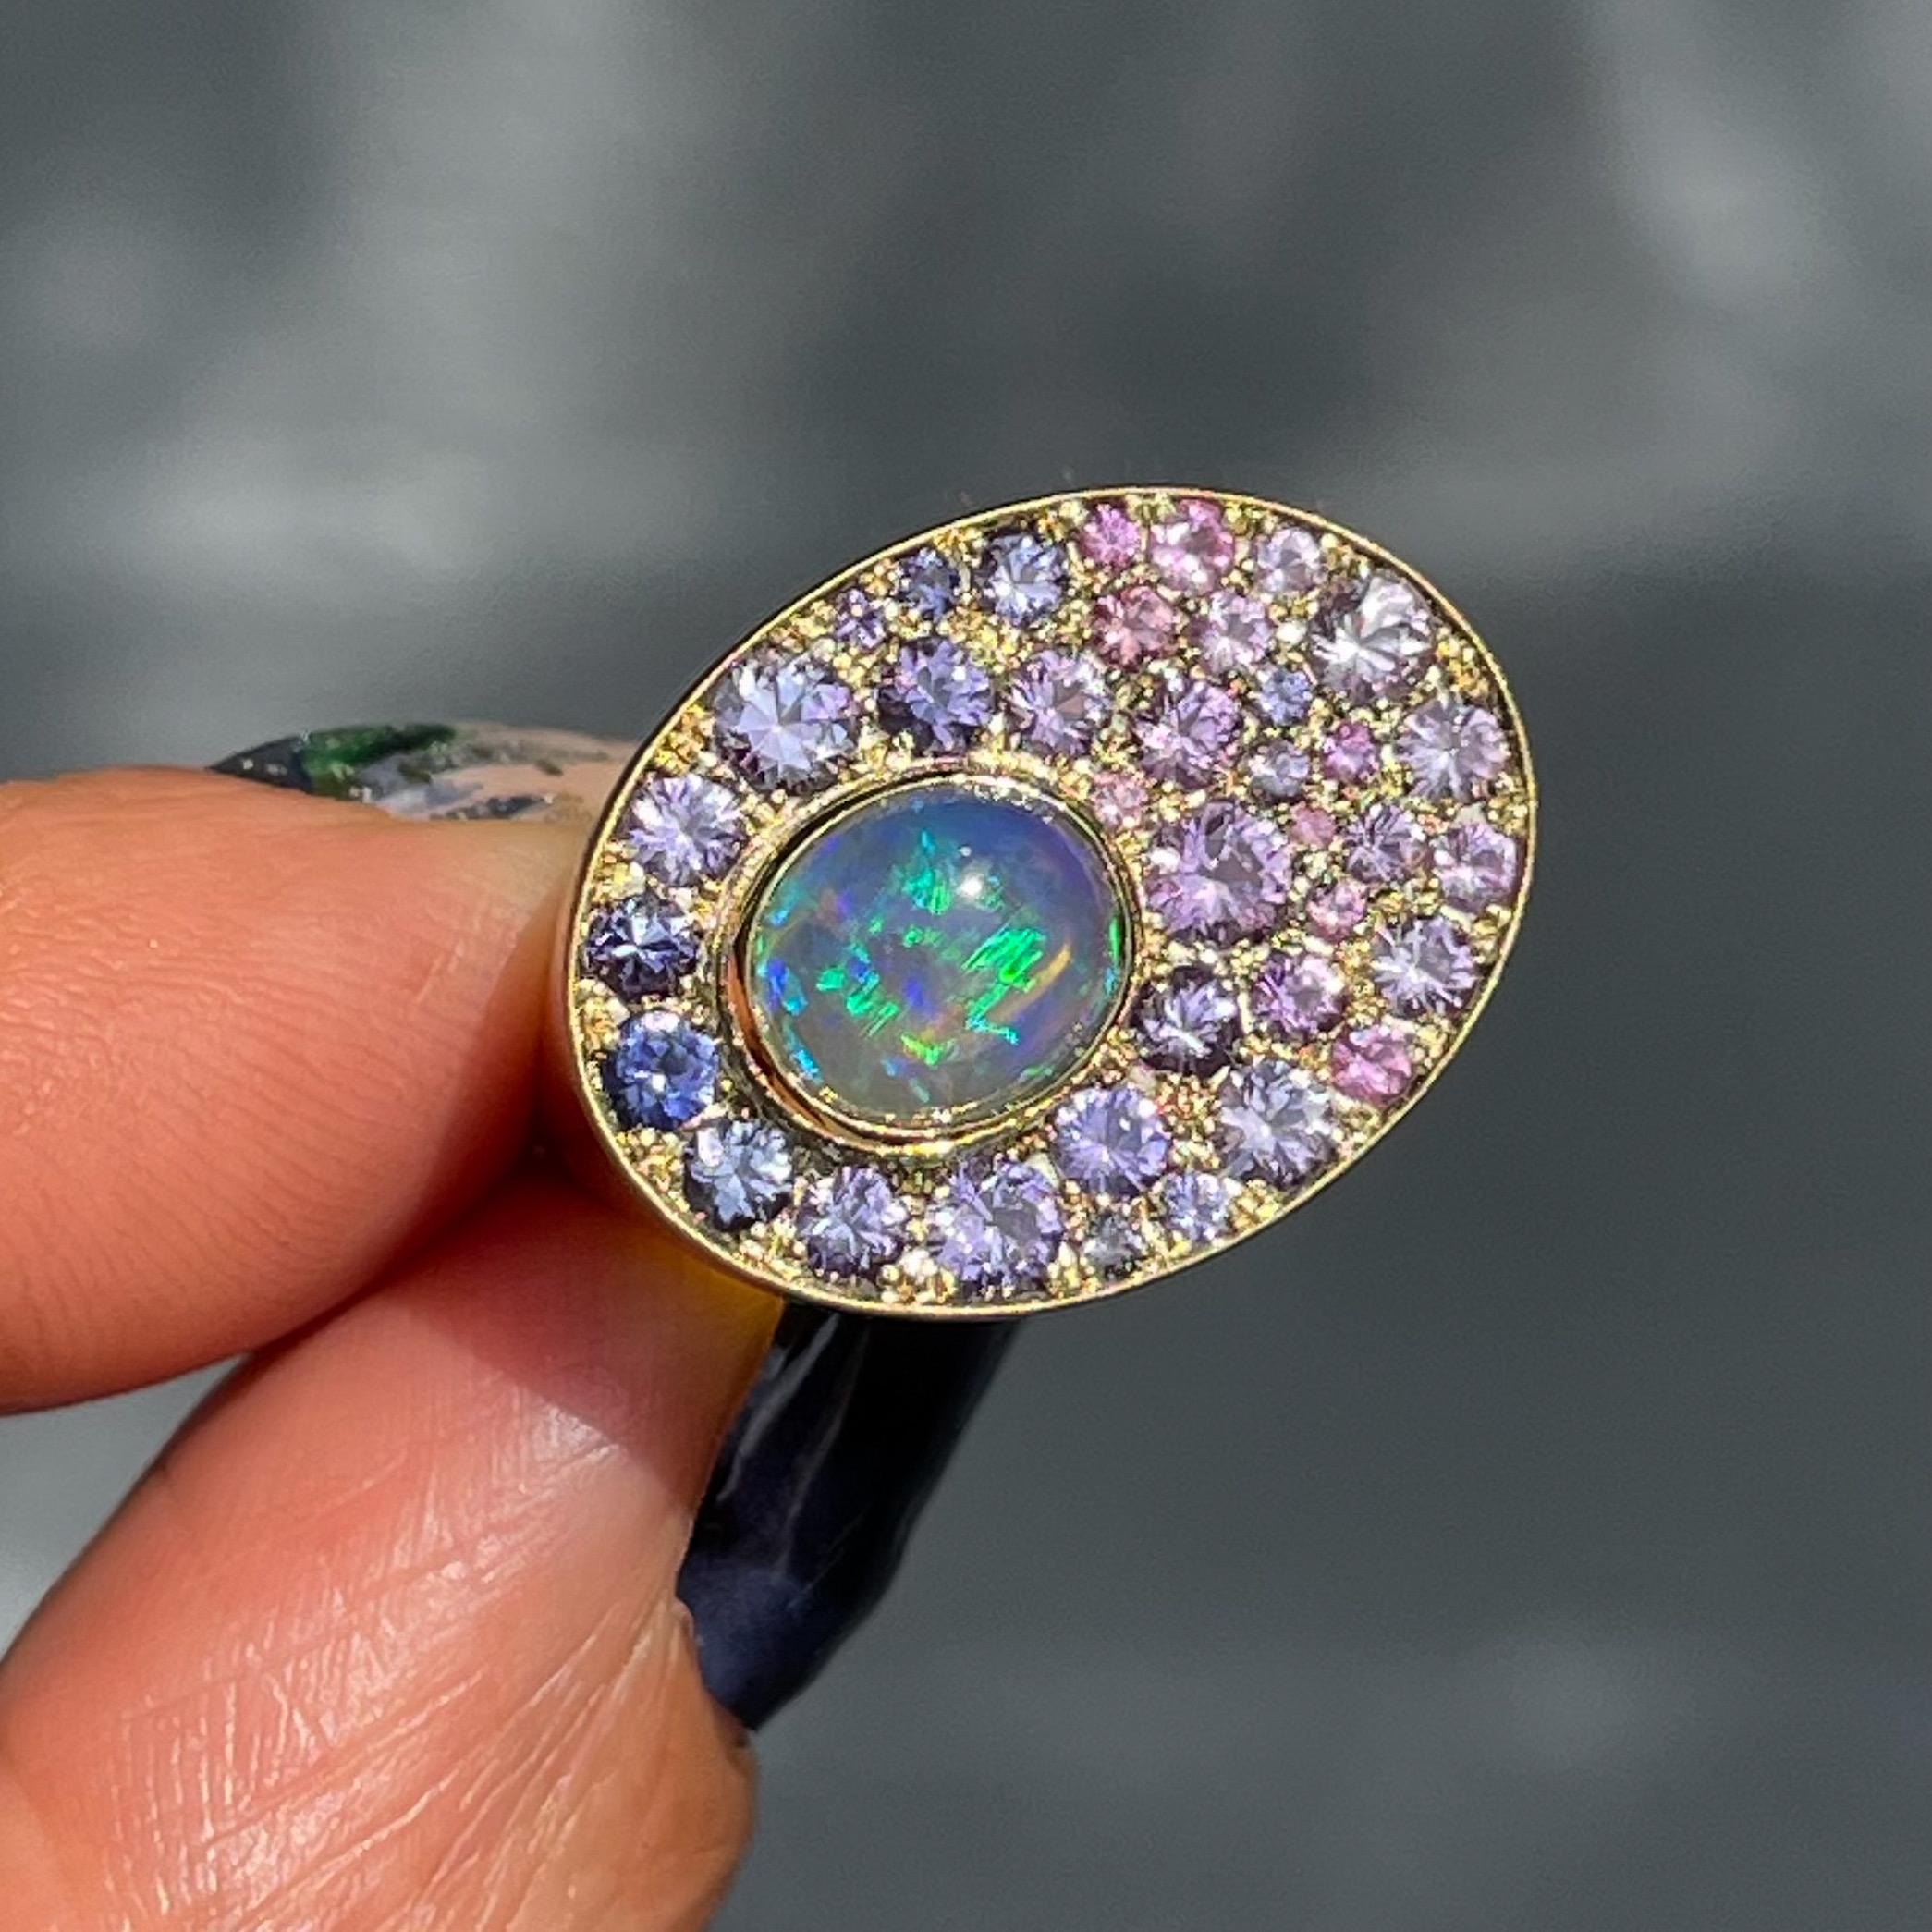 In this Australian Opal Ring a Crystal Opal emerges from a seeded pasture of sapphires. Like a blanket of shimmering sod, the pink and purple sapphires diffuse their hues around the opal in a fluid ombré pattern. Ranging from soft pink to rich